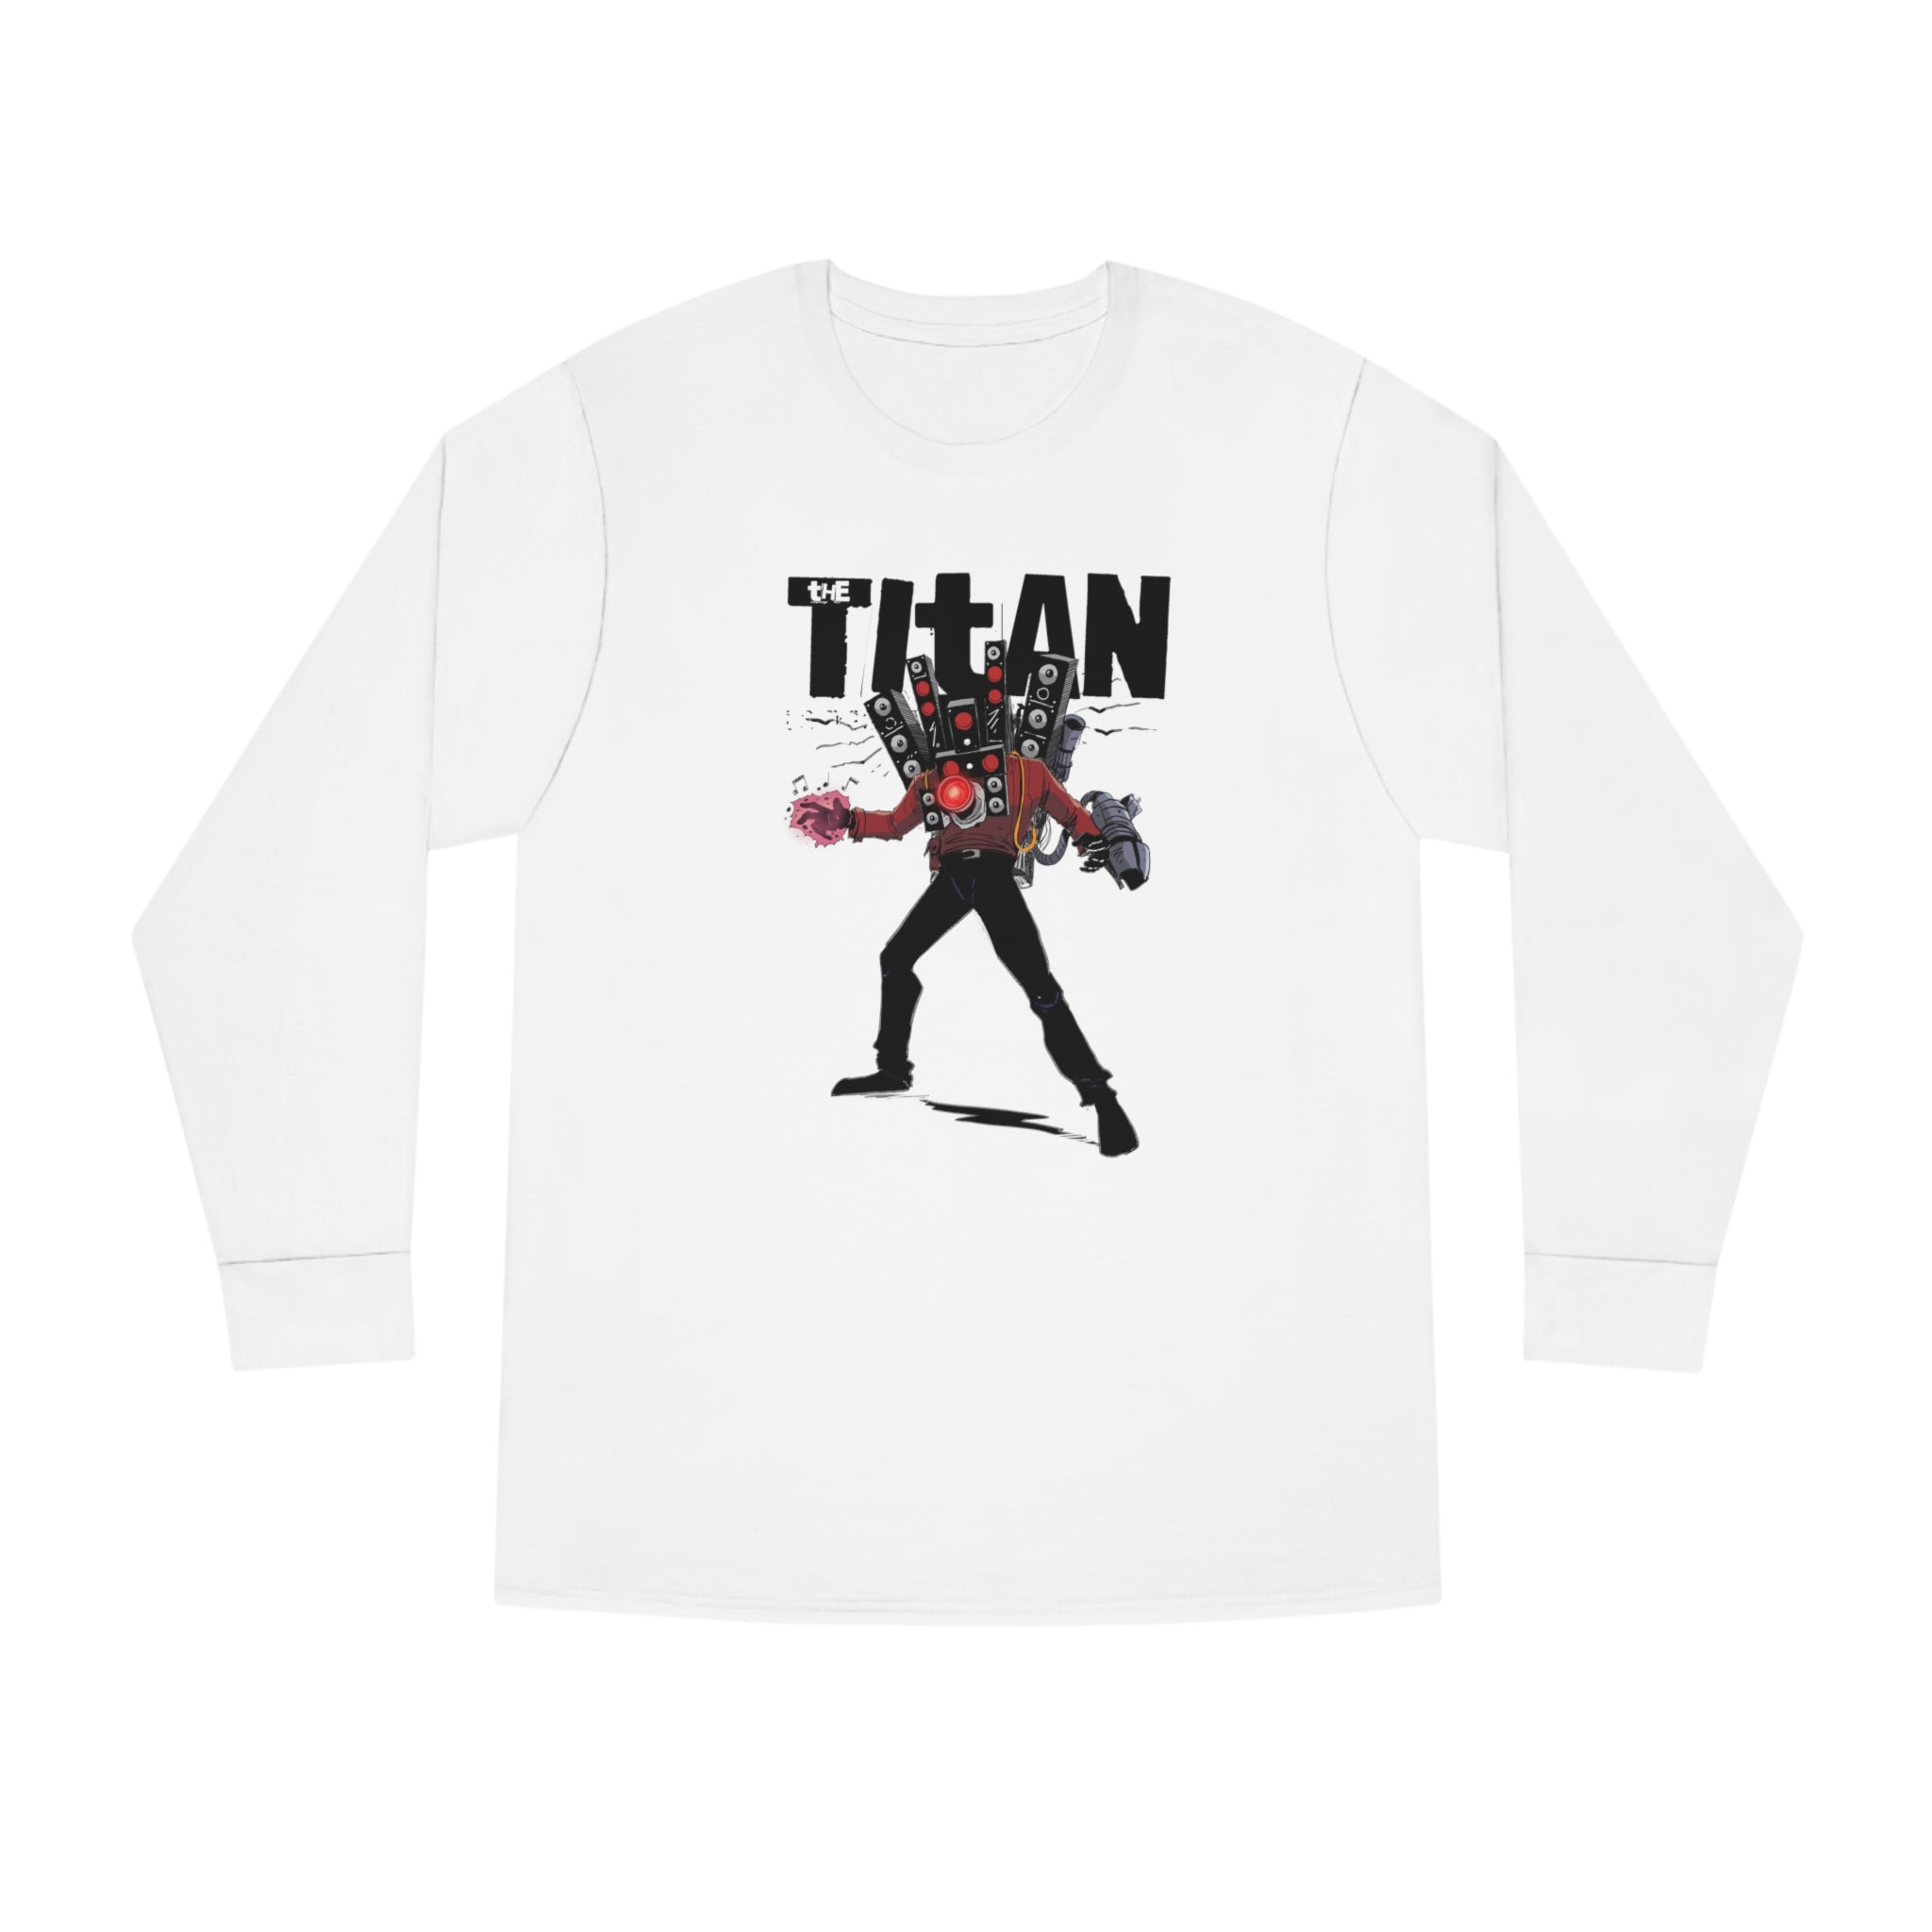 White long sleeve shirt with a centered Titan Speakerman graphic.